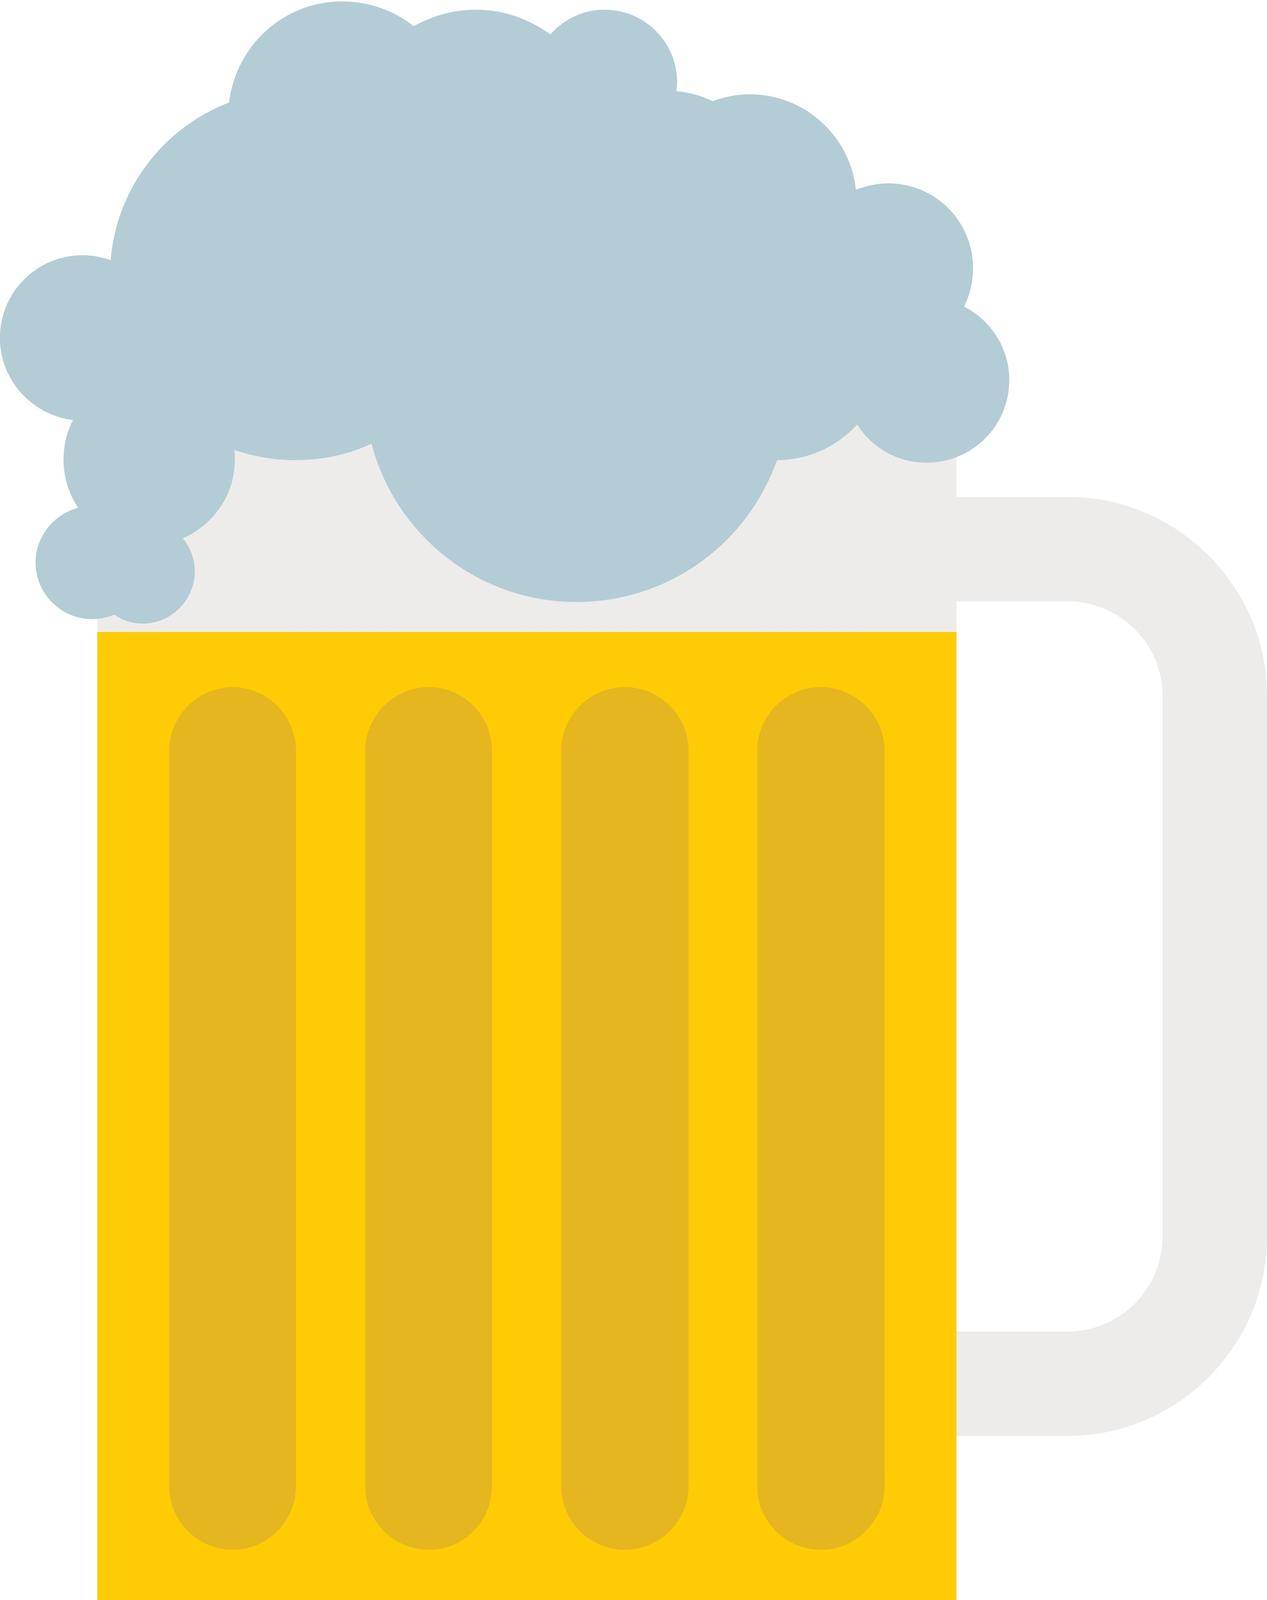 Mug of beer icon in flat style by ylivdesign